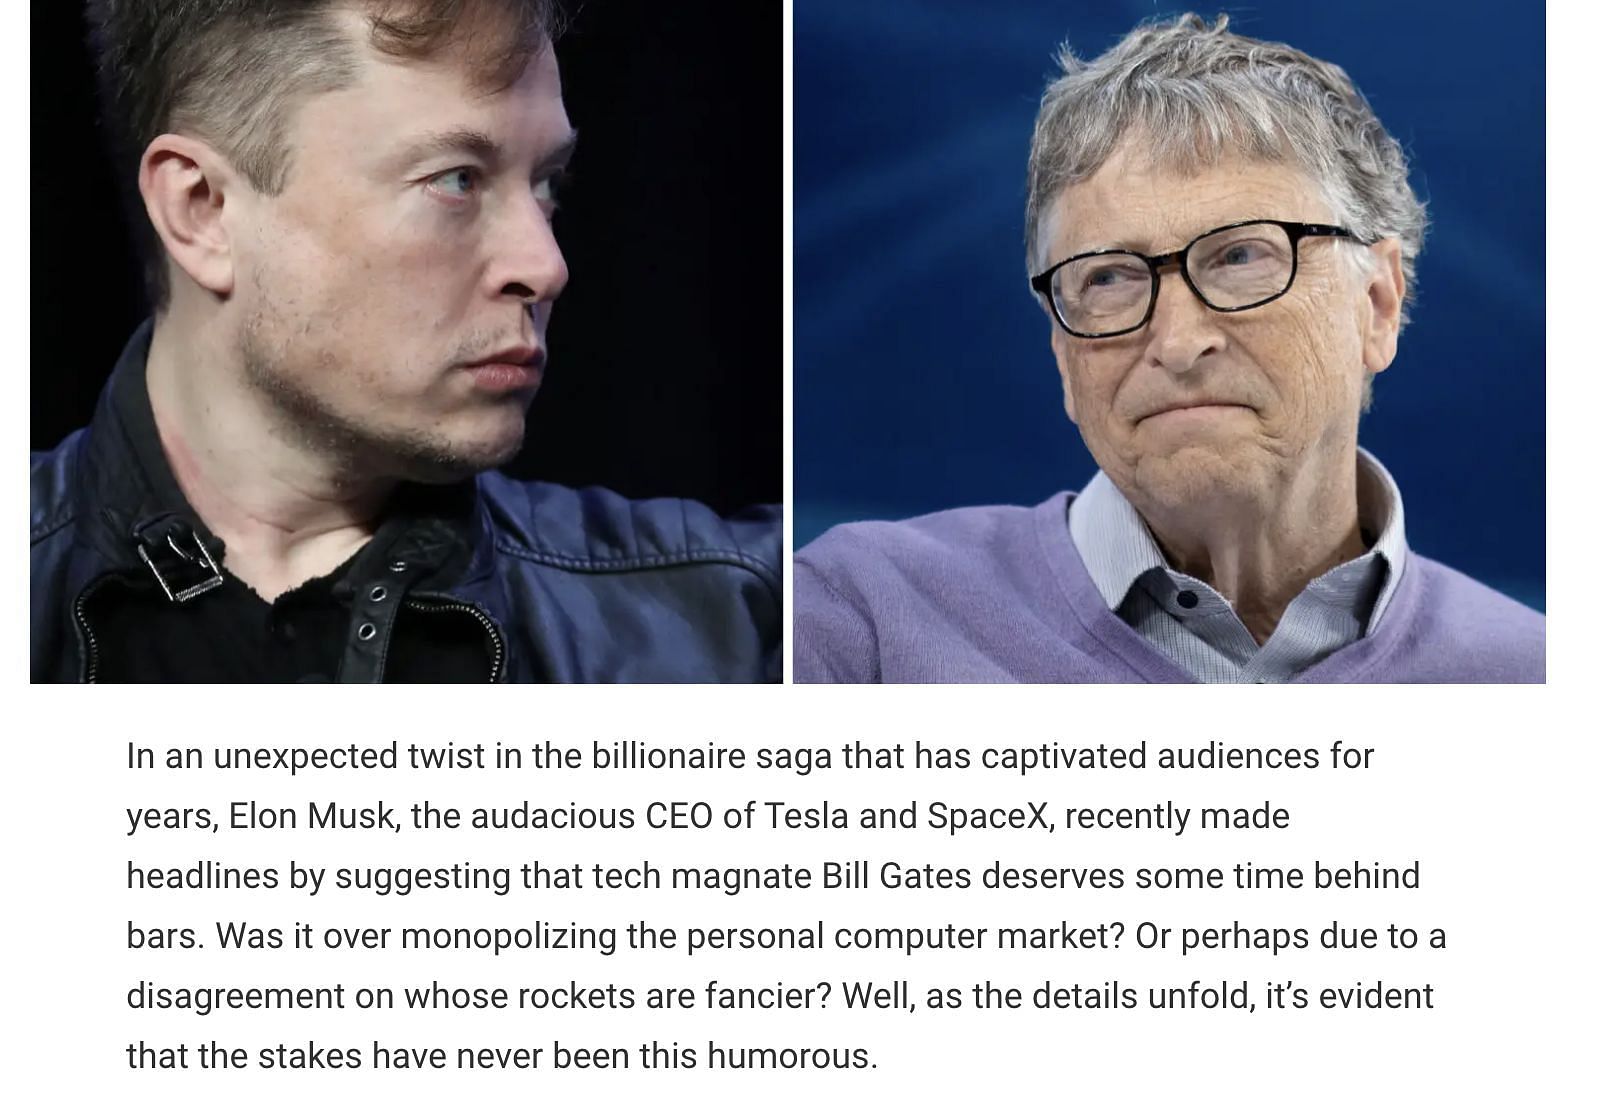 Fake news debunked as an article published on a website claimed Elon Musk suggested that Bill Gates should be put in prison. (Image via Space X Media)